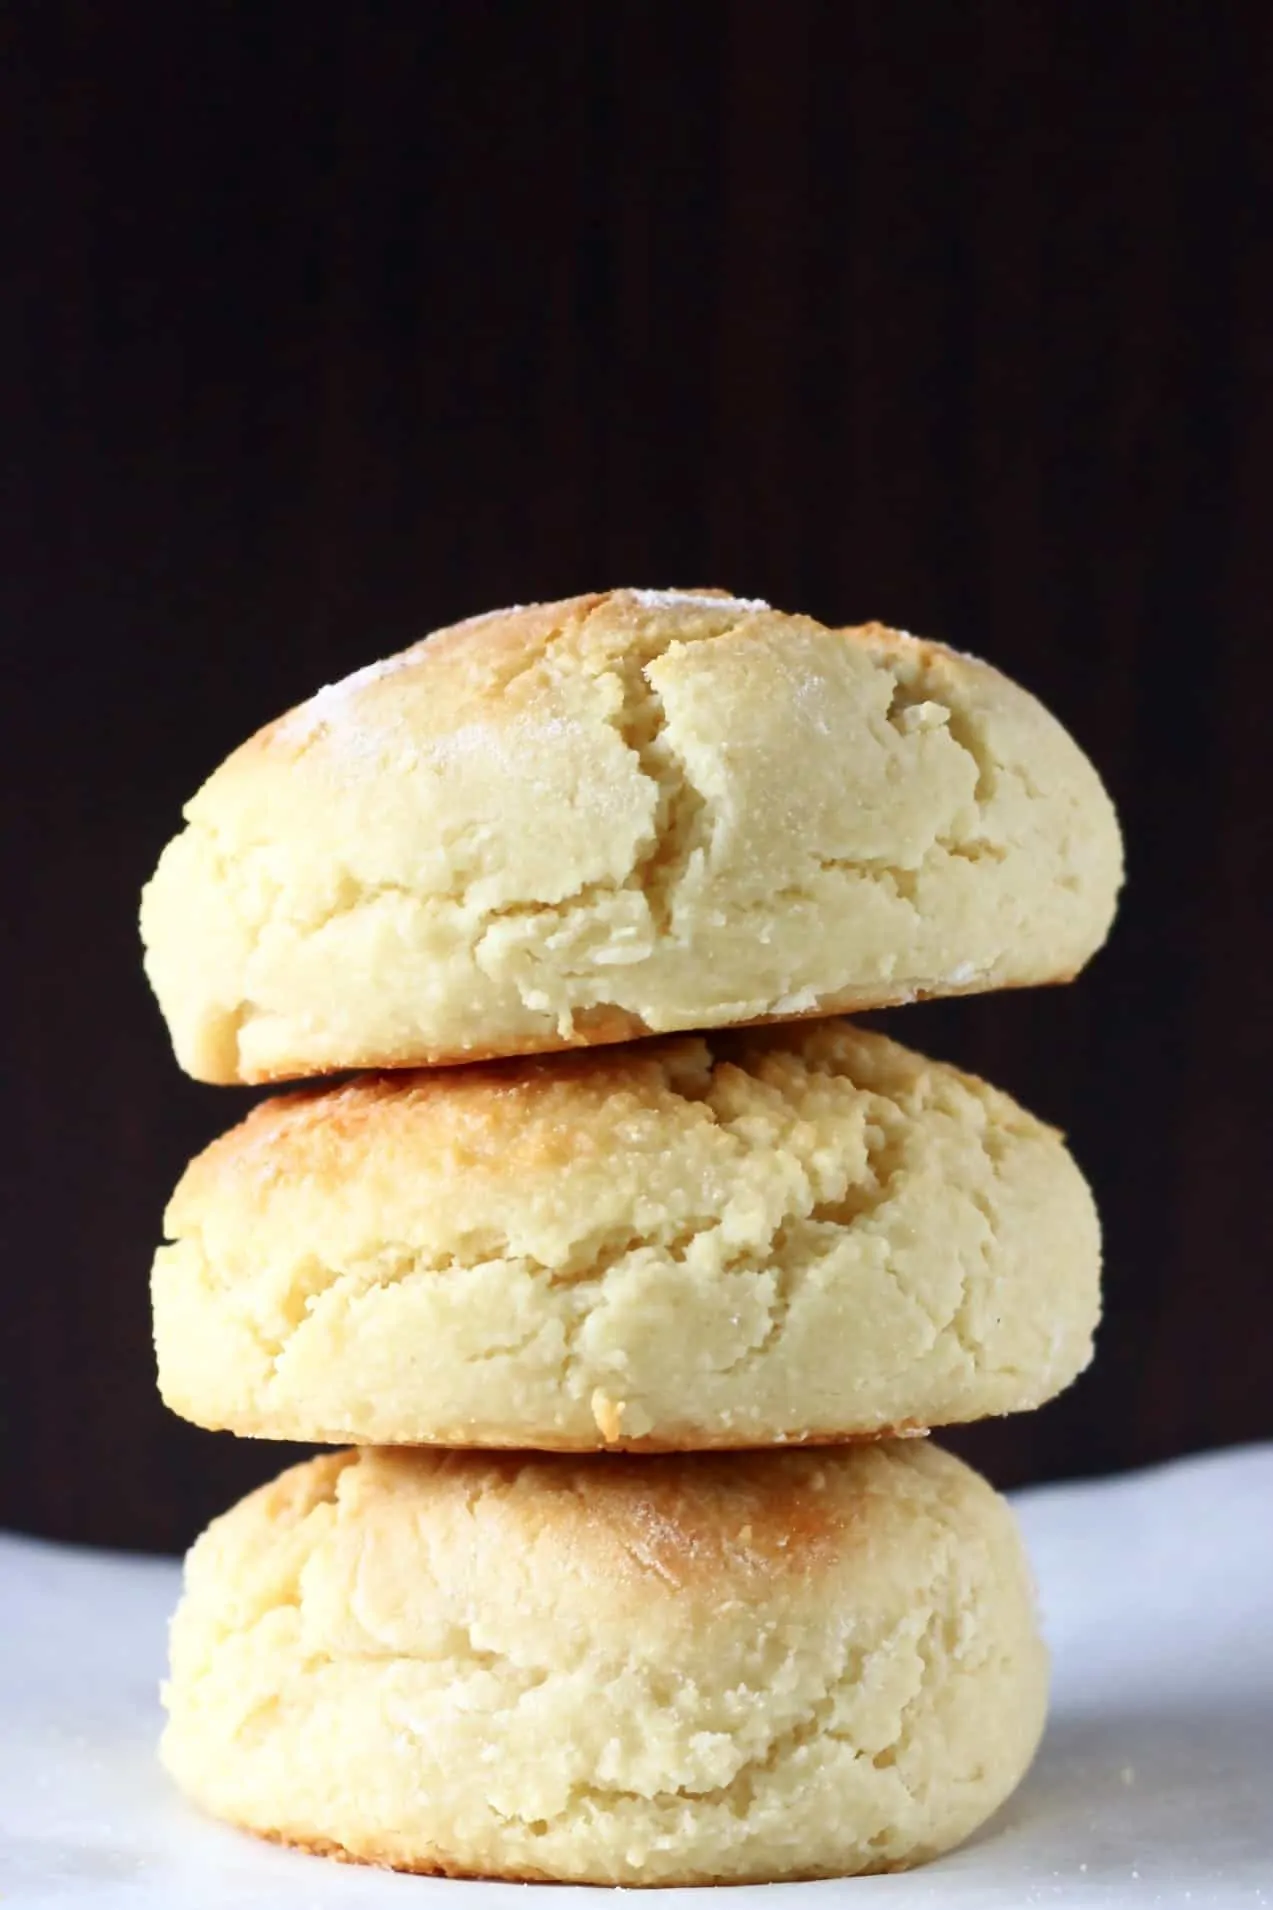 Three gluten-free vegan biscuits stacked on top of each other against a dark brown background